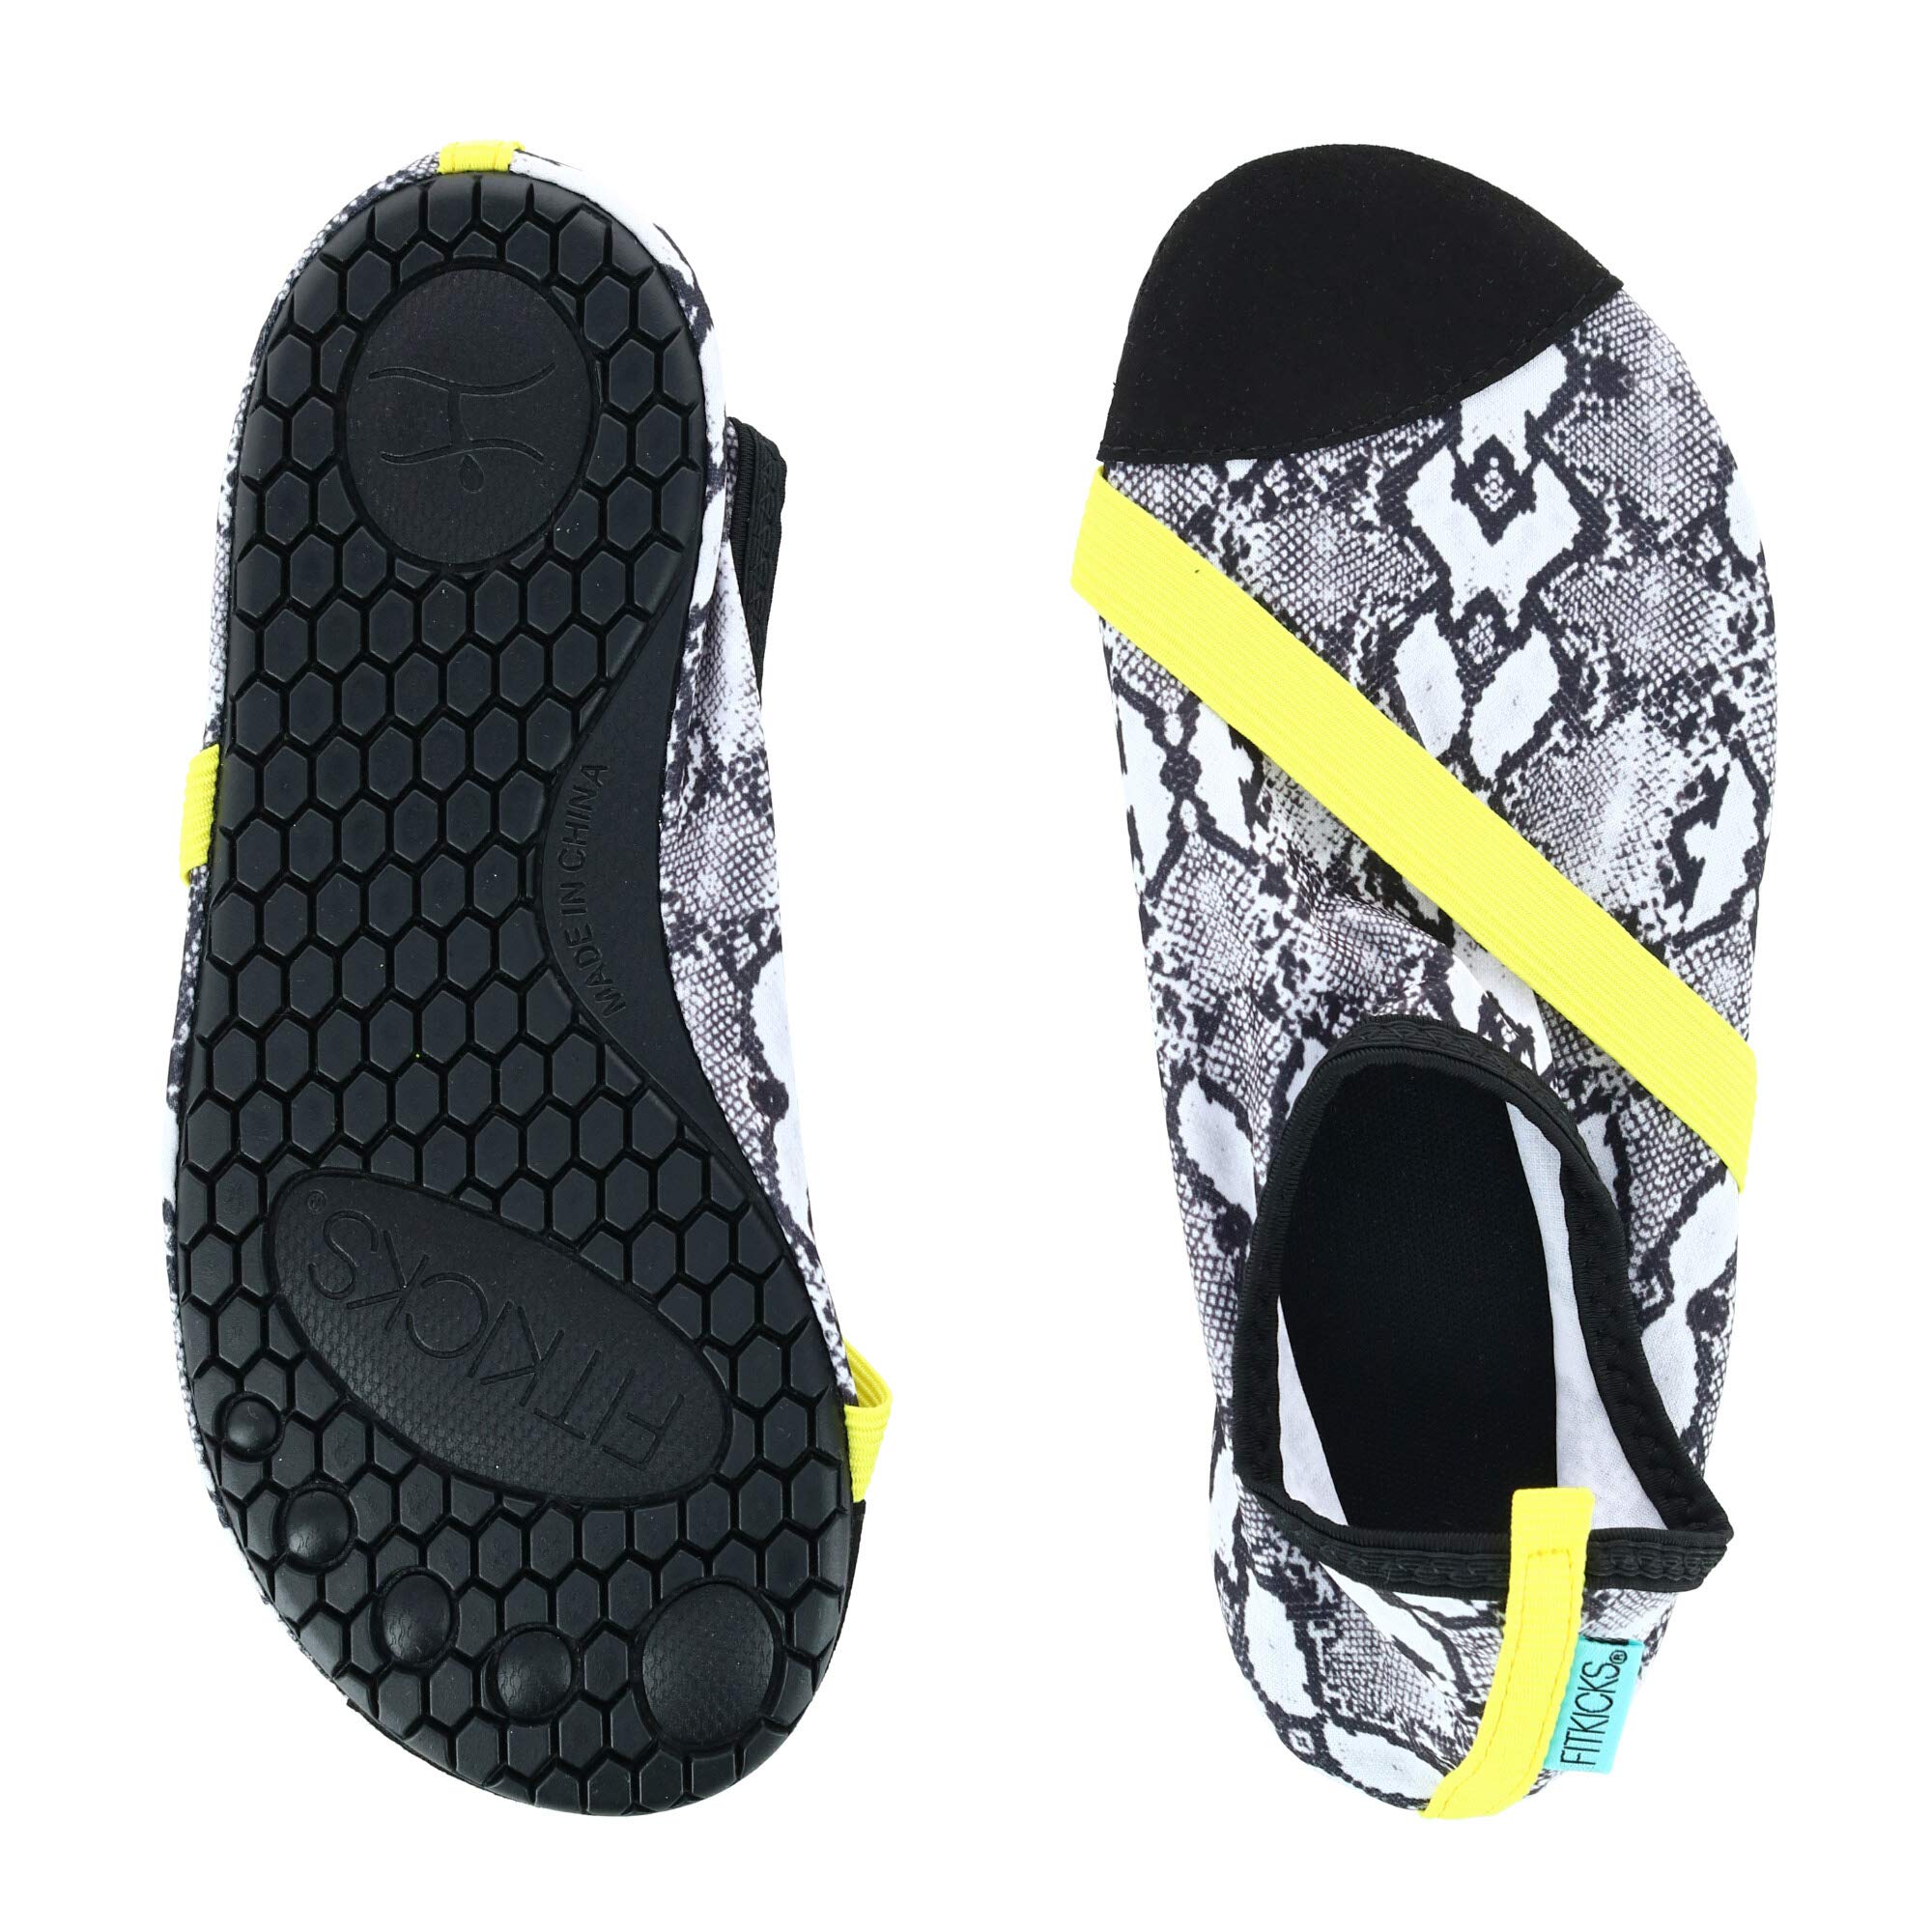 FITKICKS Special Edition Active Footwear, Foldable Shoes - Venom, Medium